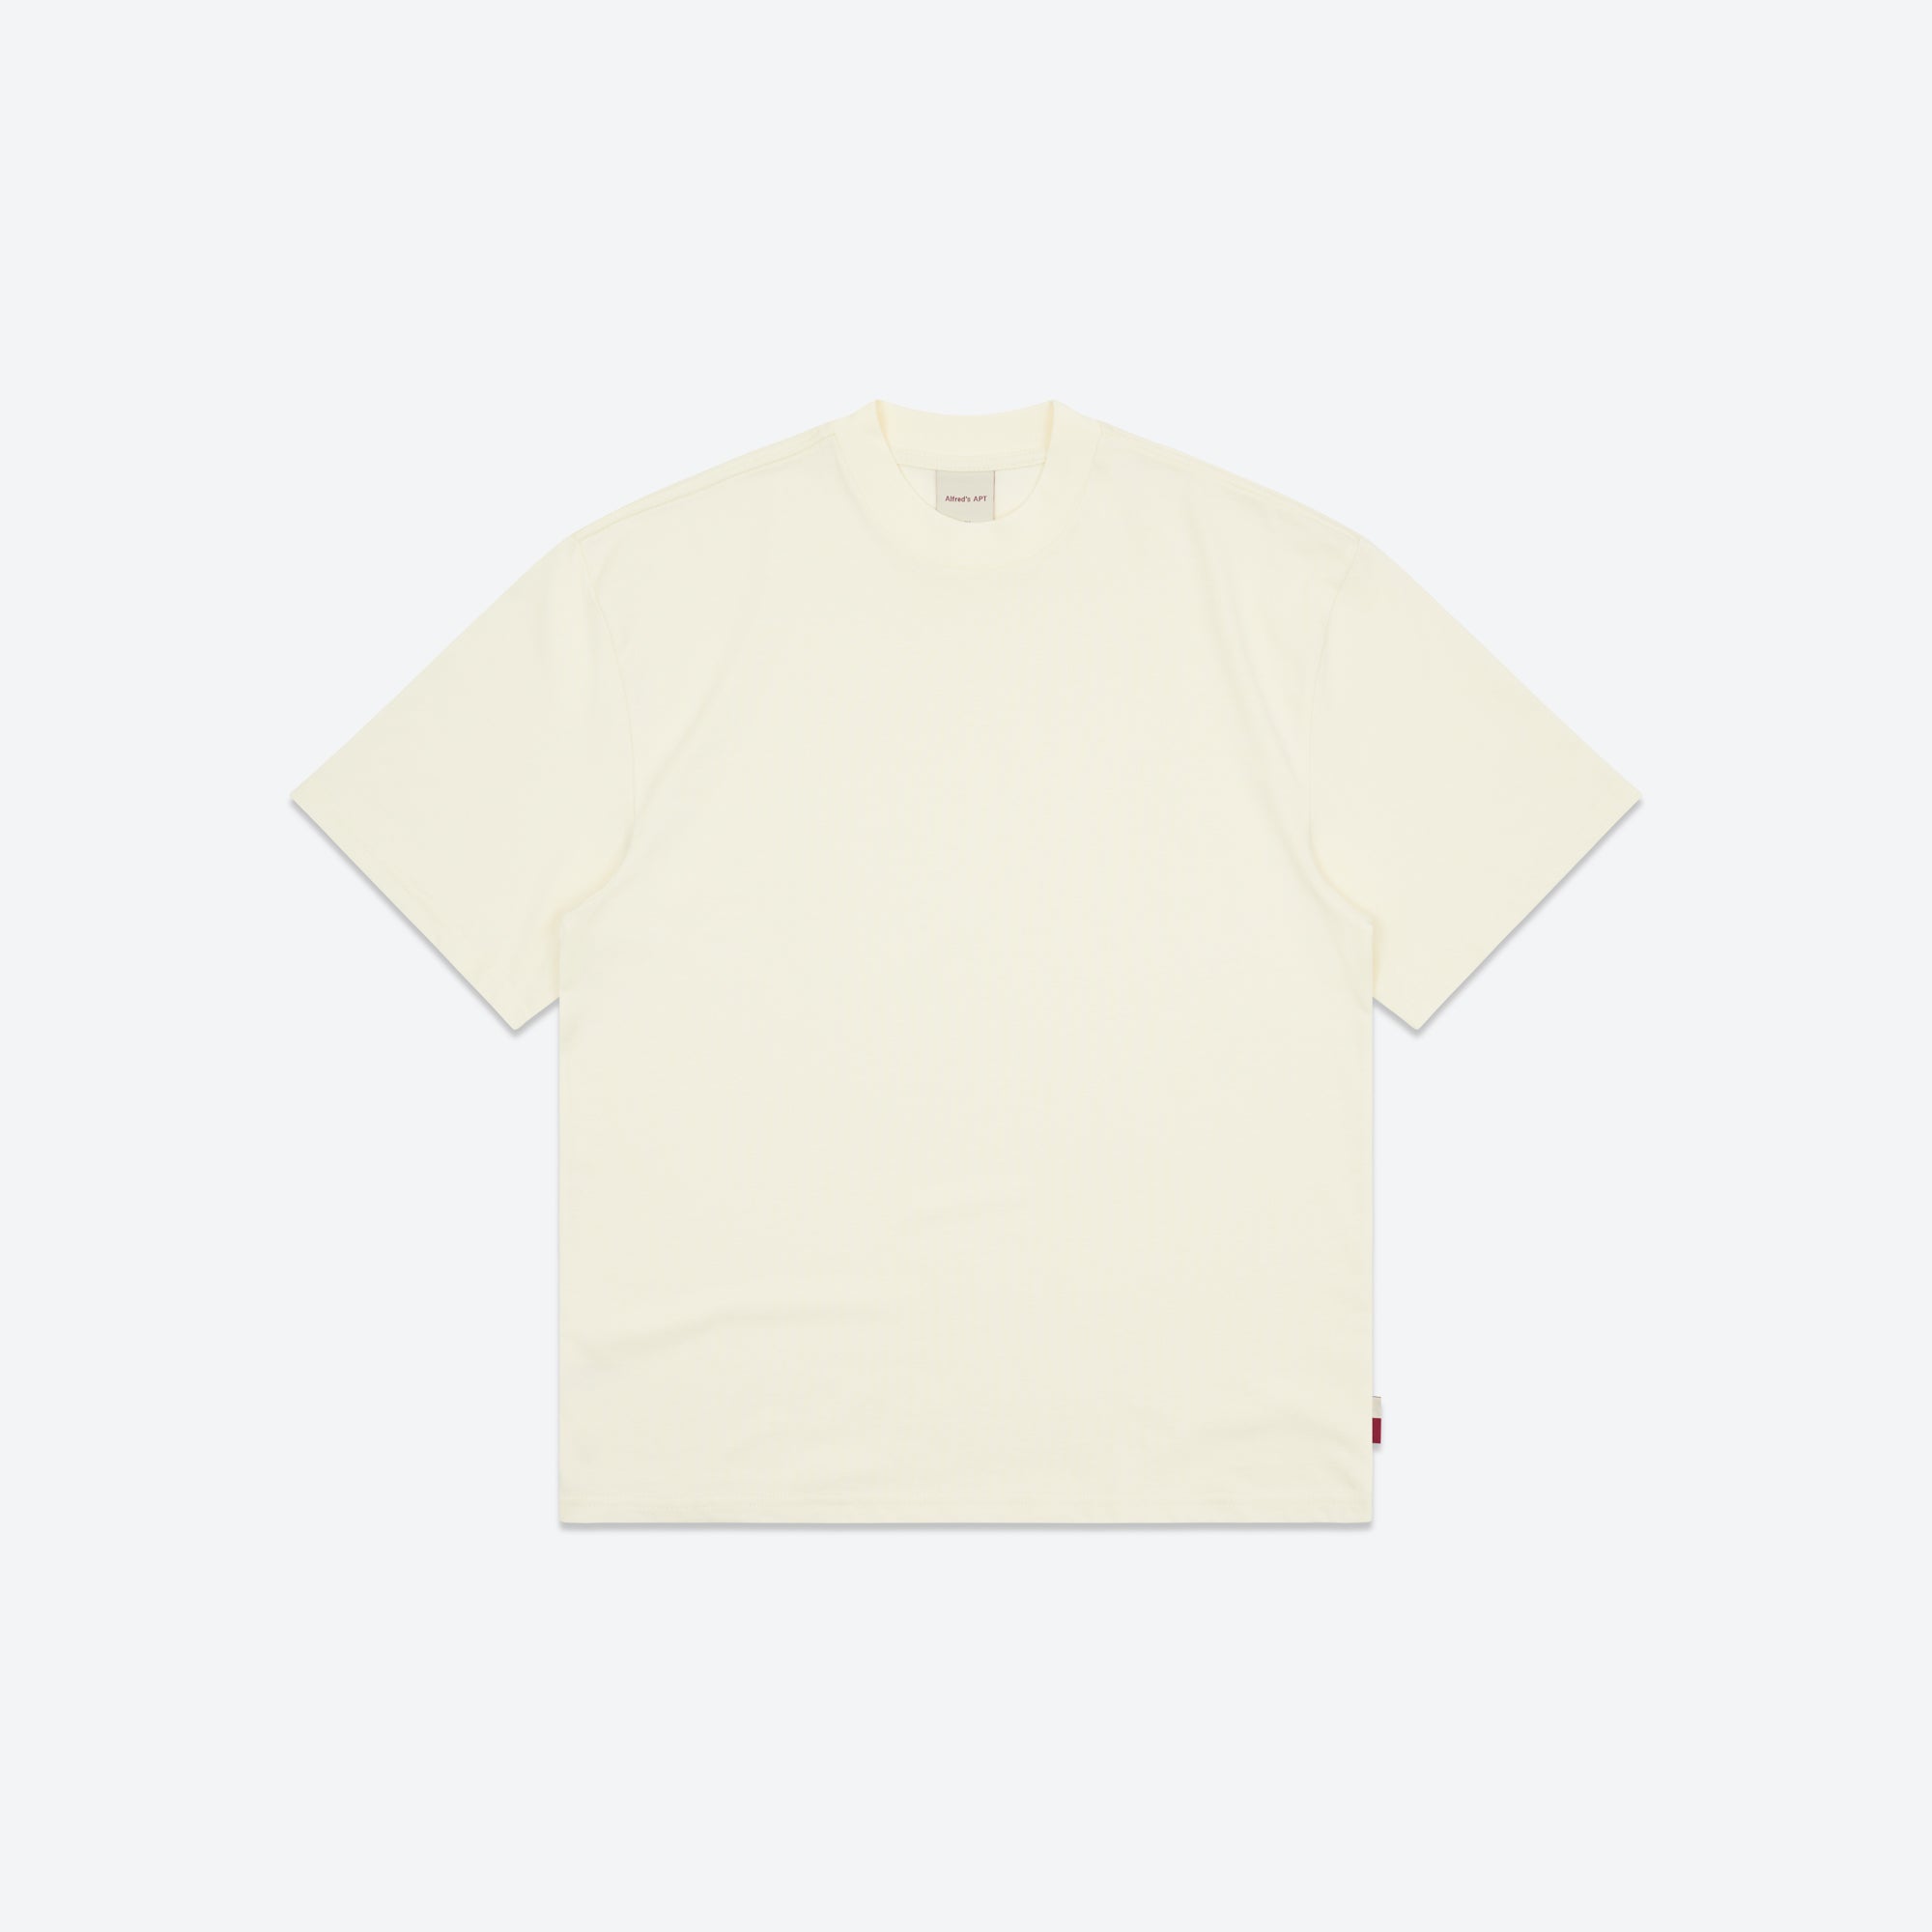 Alfred's Apartment - Trusted Tee - Cream